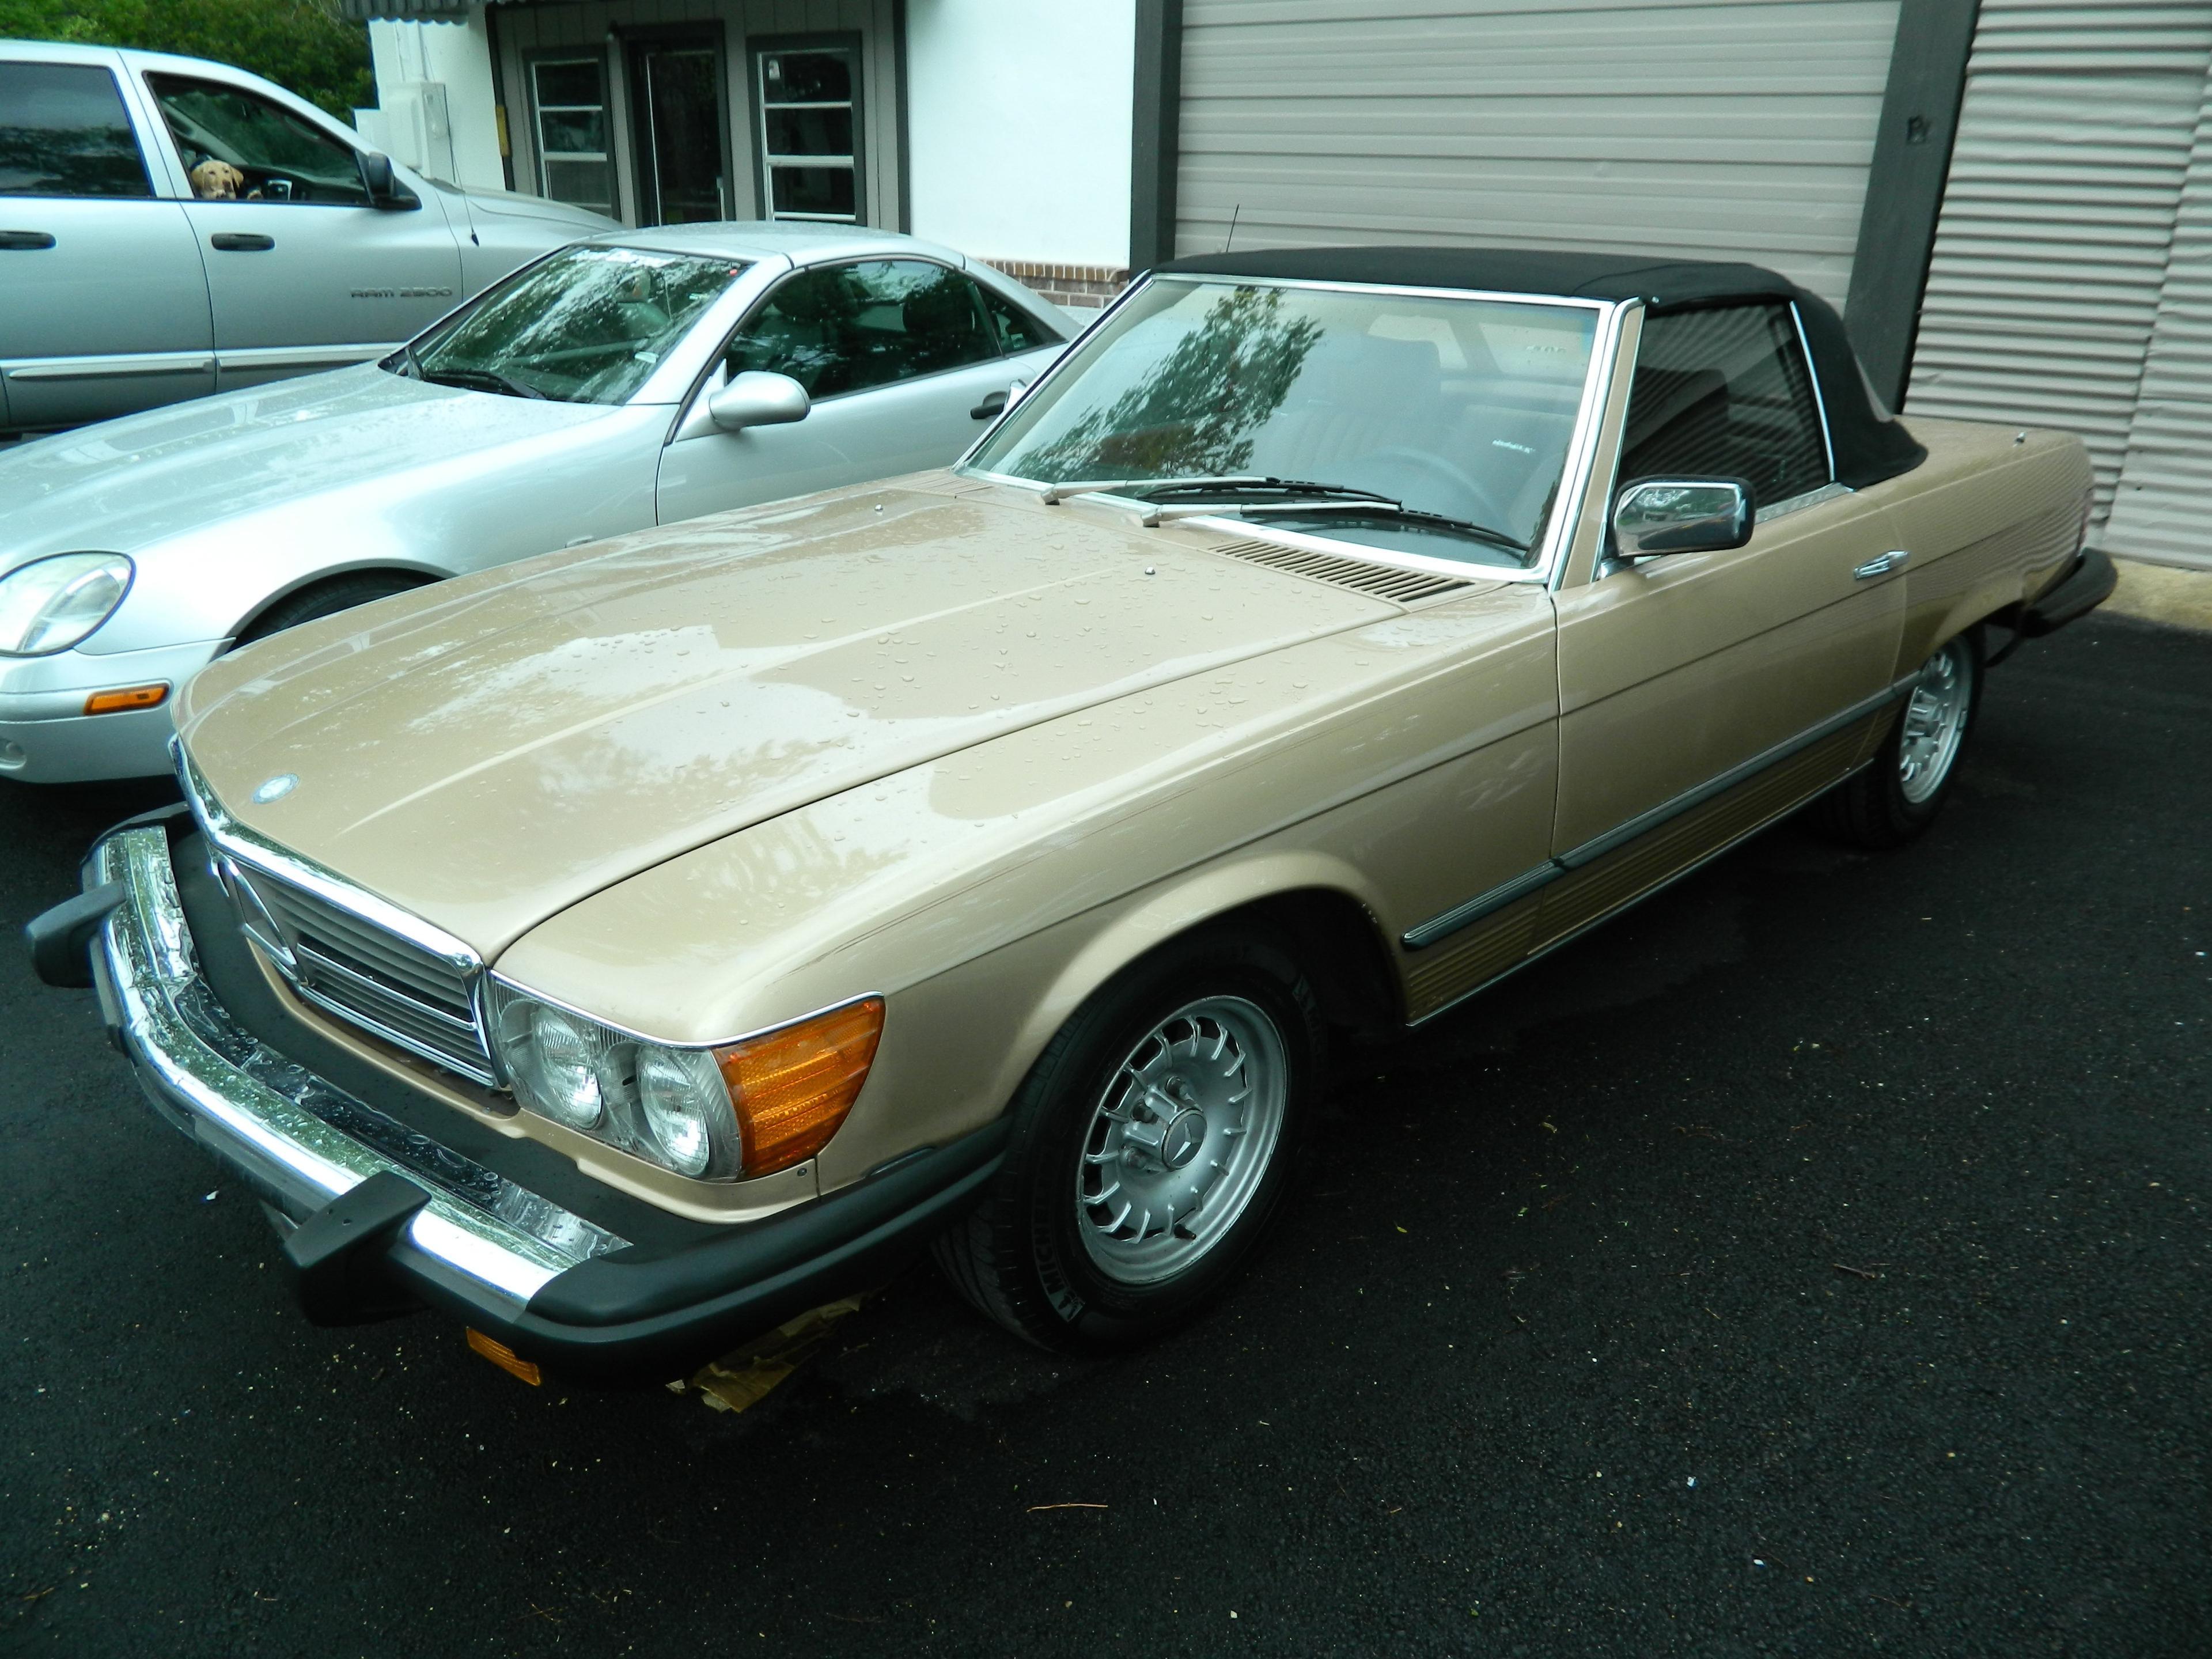 1985 Mercedes Benz 380SL, 3.8L OHC V8, 4 Speed Automatic Transmission. Both Hard and Soft Tops